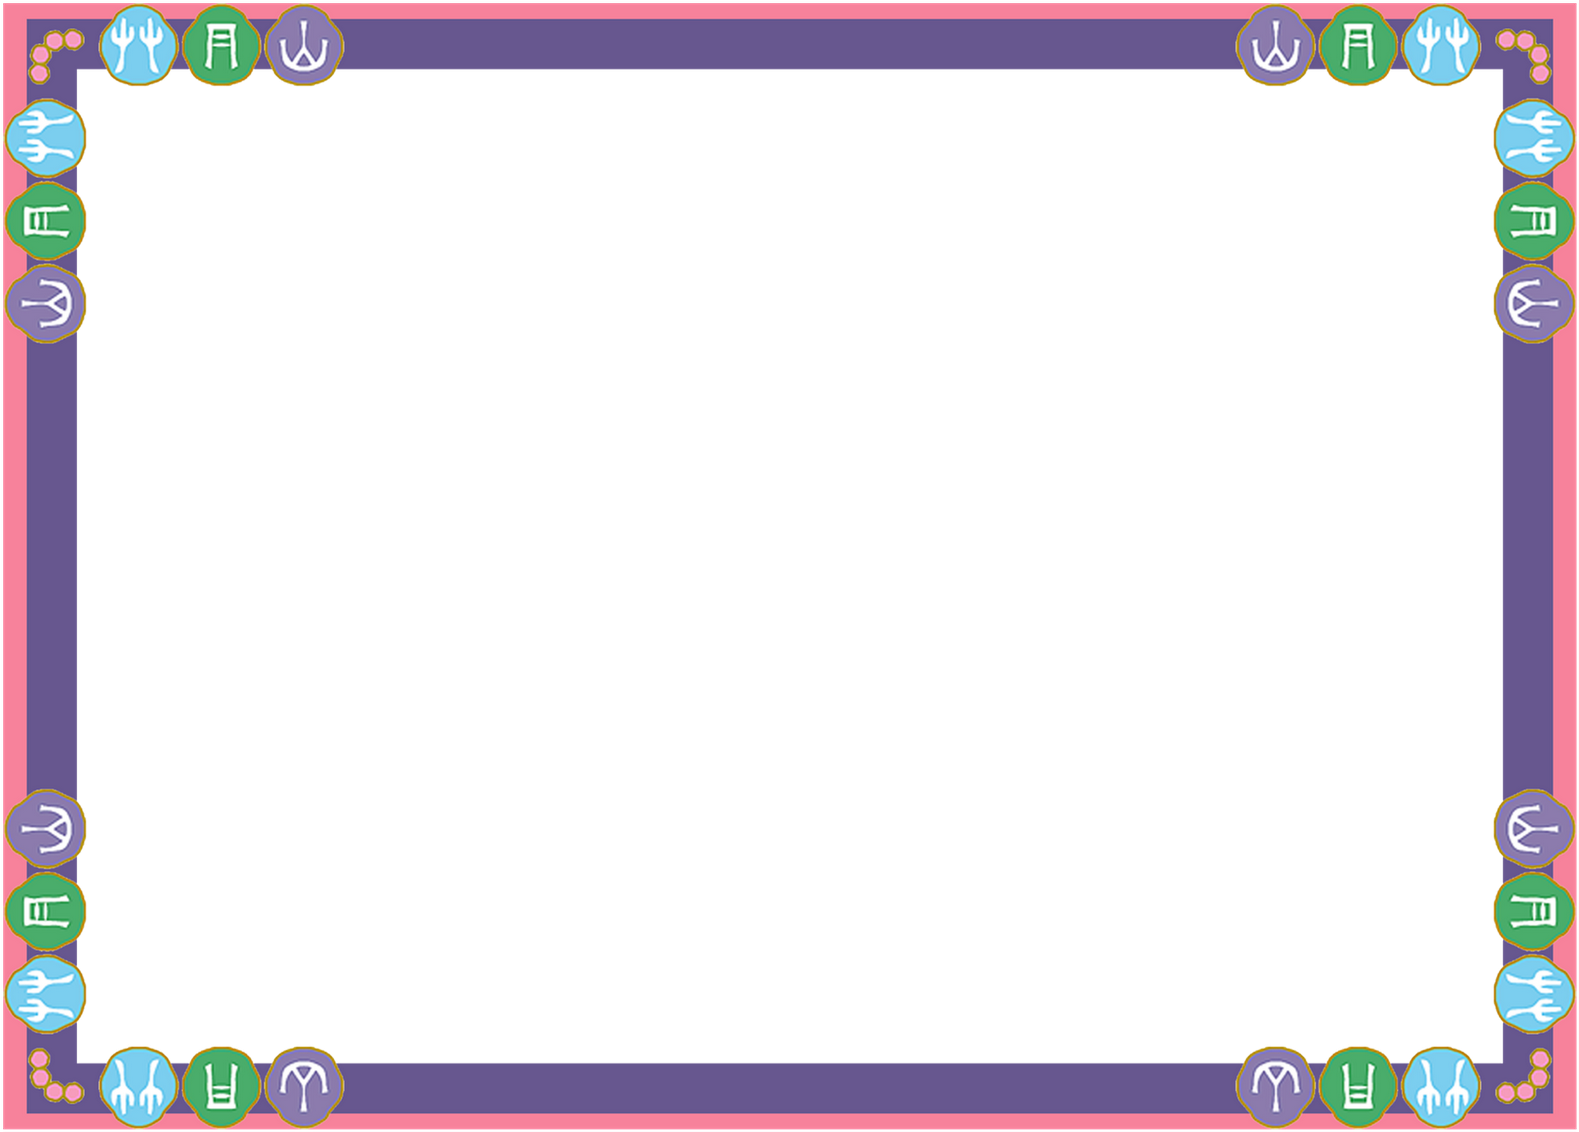 A Black Screen With Purple And Green Border